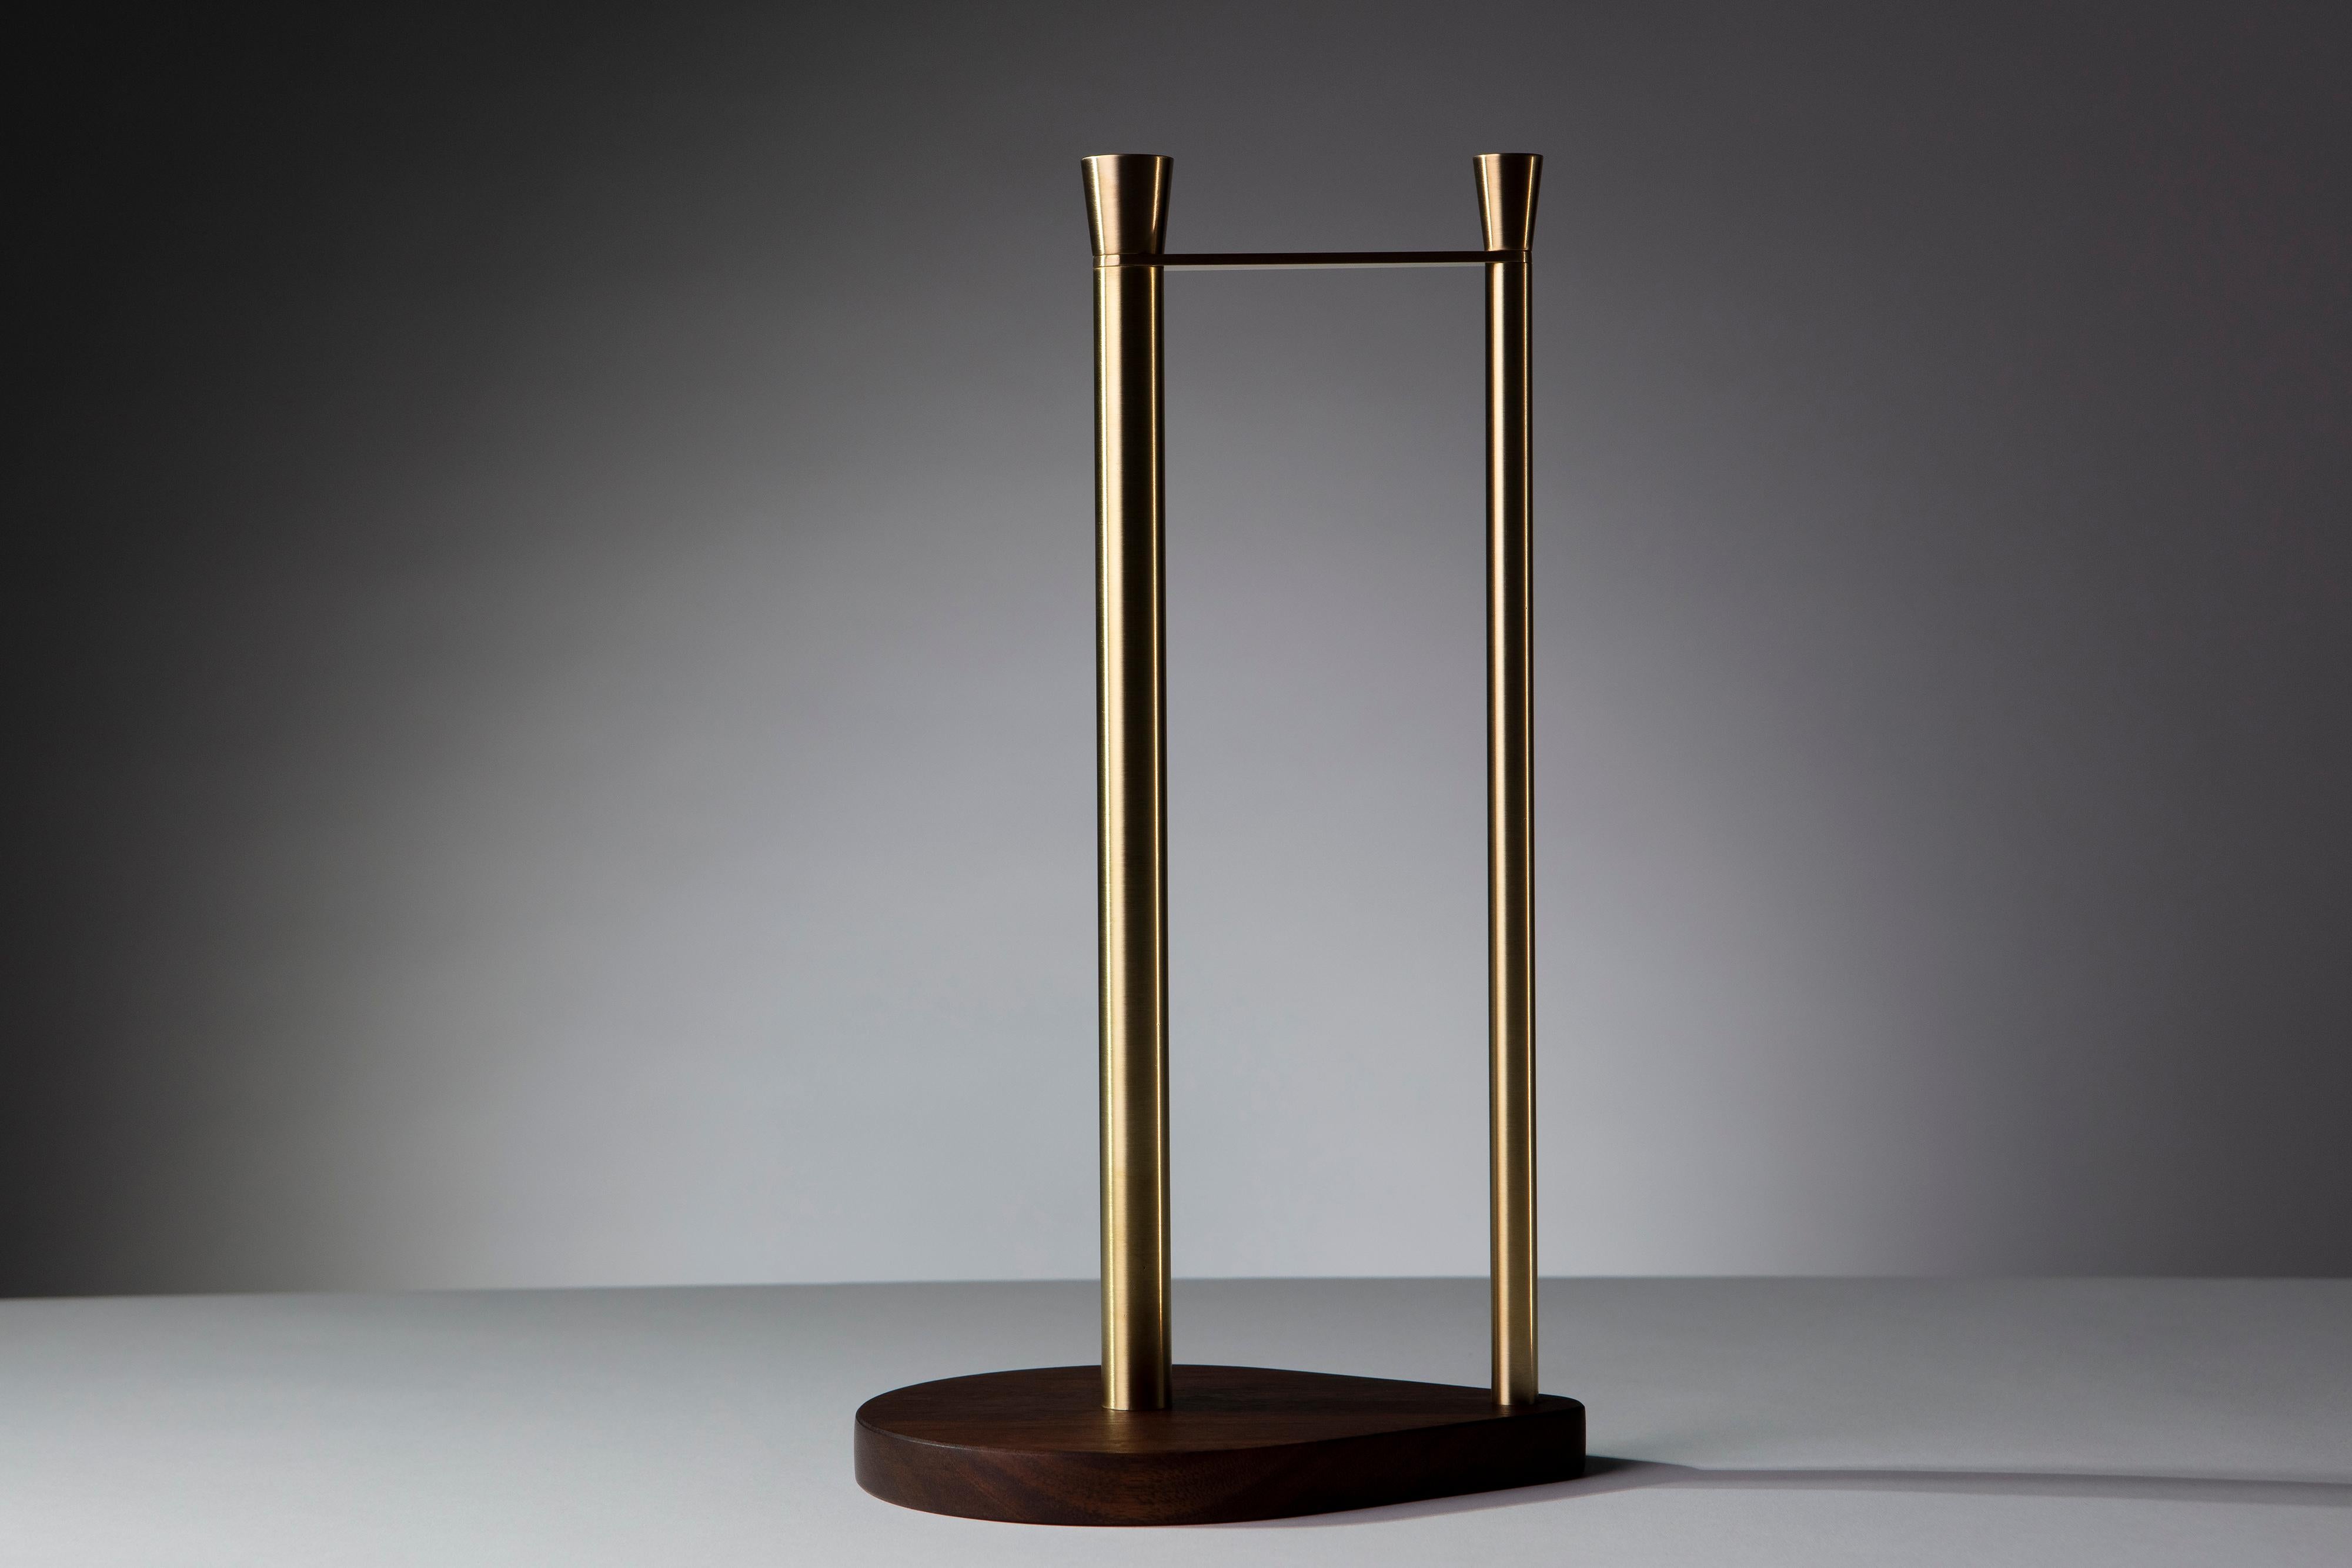 Elegant modernist unlacquered brass paper towel holder with a walnut base finished in a hard-wax oil. The brass finish will naturally patina and deepen with time.